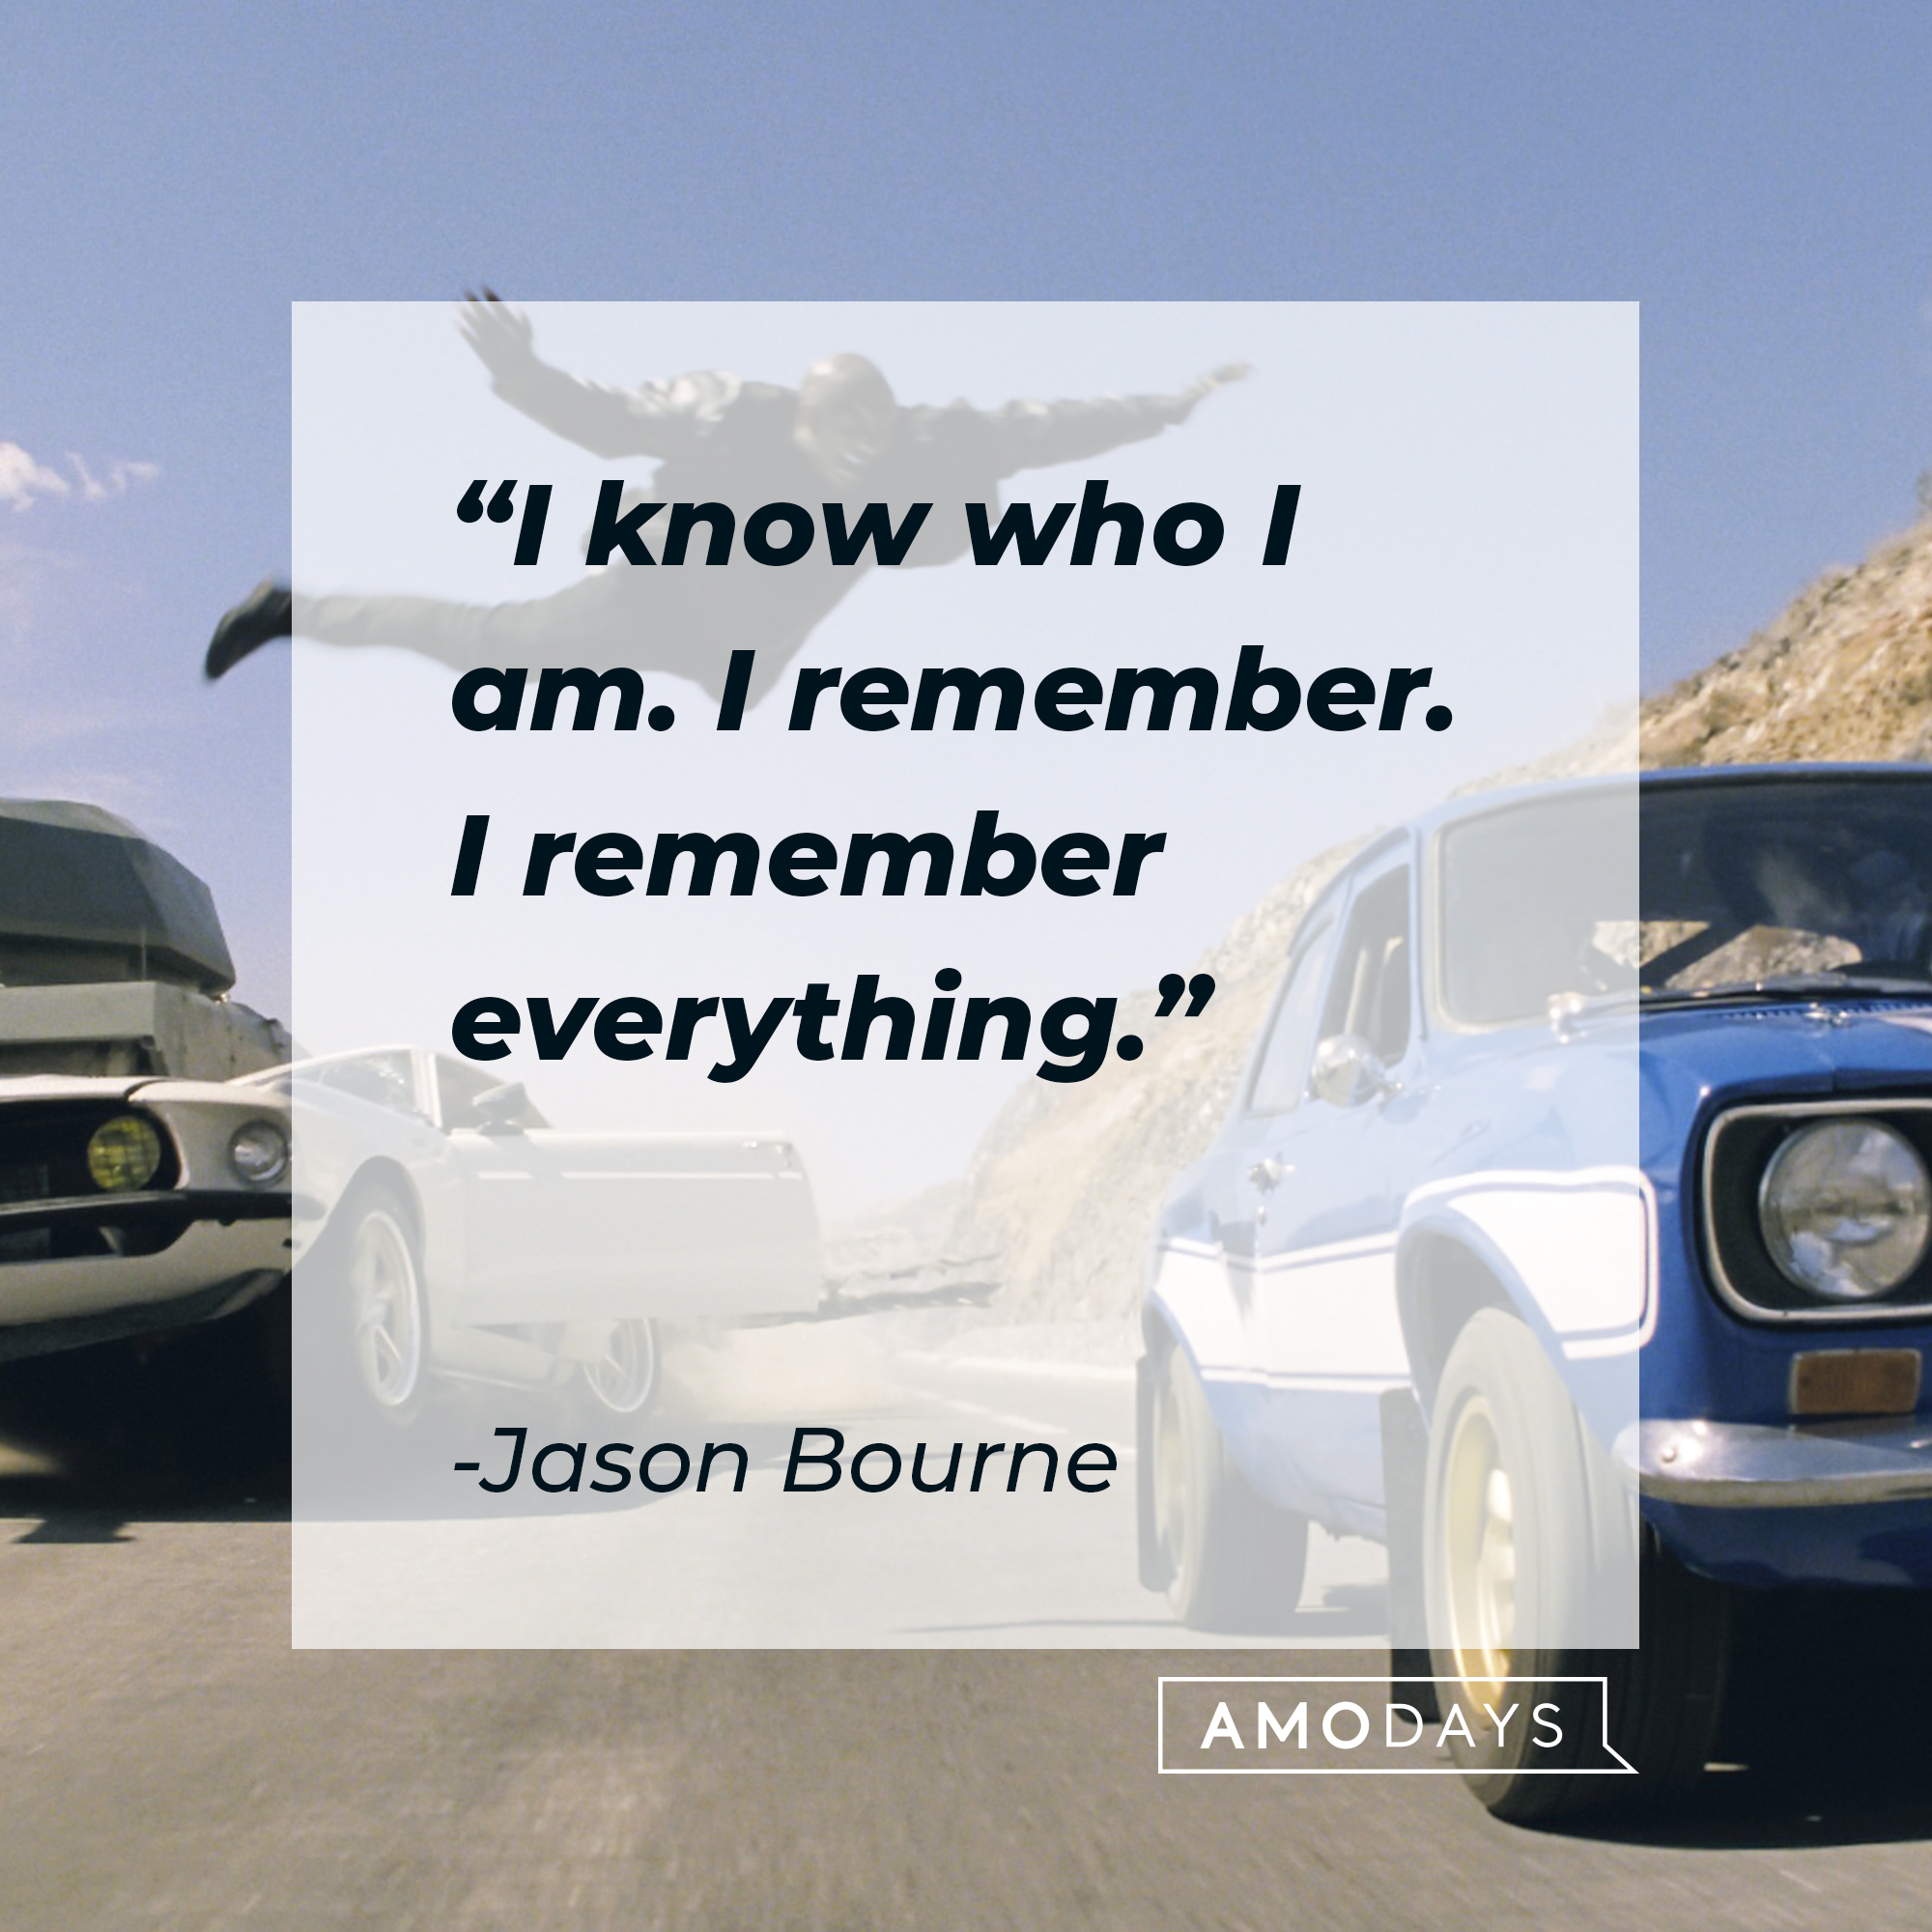 Jason Bourne's quote: "I know who I am. I remember. I remember everything." | Source: facebook.com/TheBourneSeries